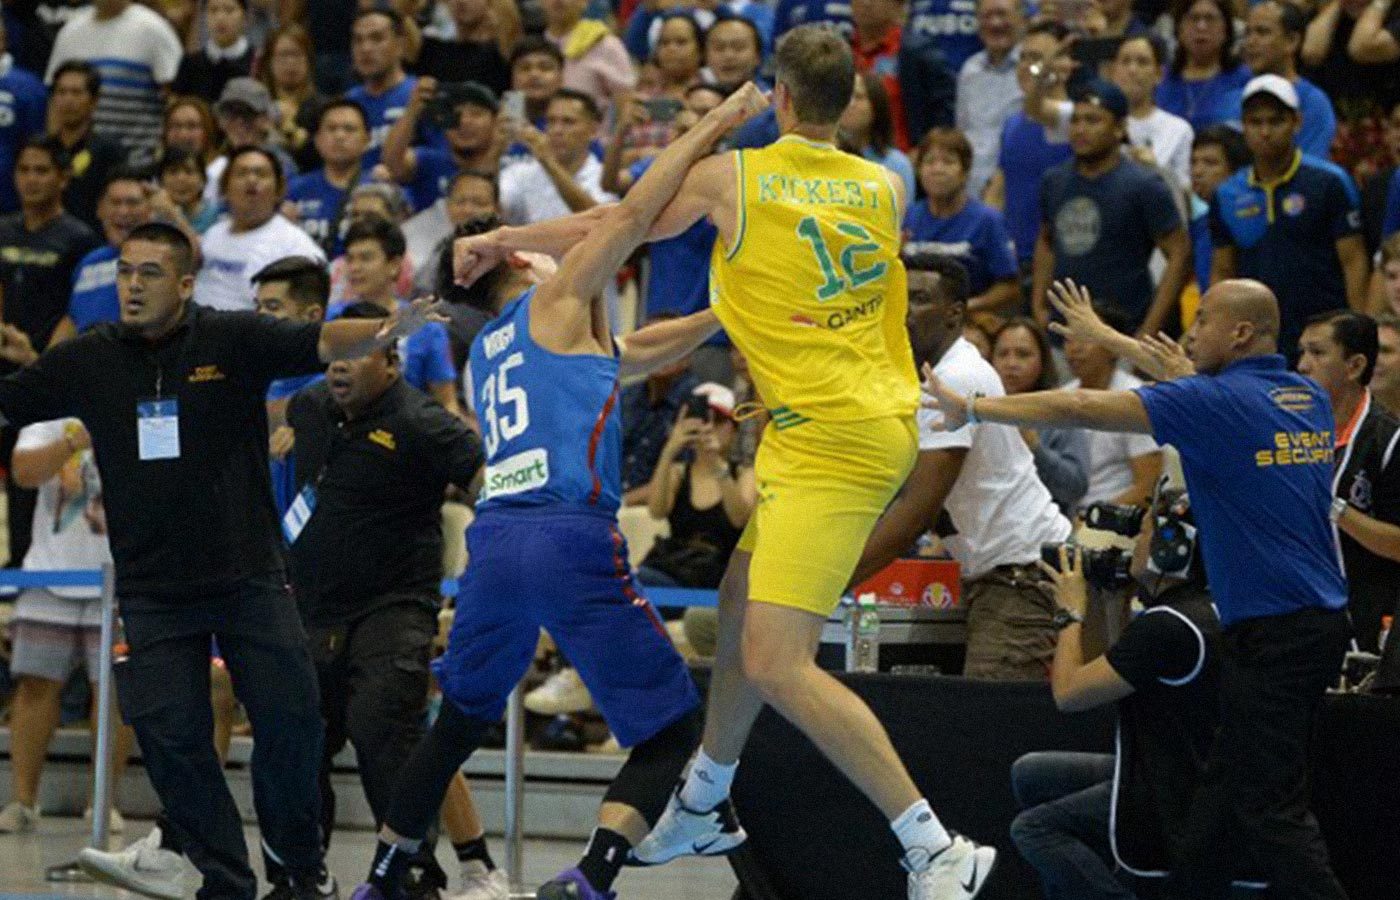 EMBARRASSING. The Philippine and Australian basketball officials apologize for the incident that brought disgrace to the sport. Photo by Ted Aljibe/AFP 